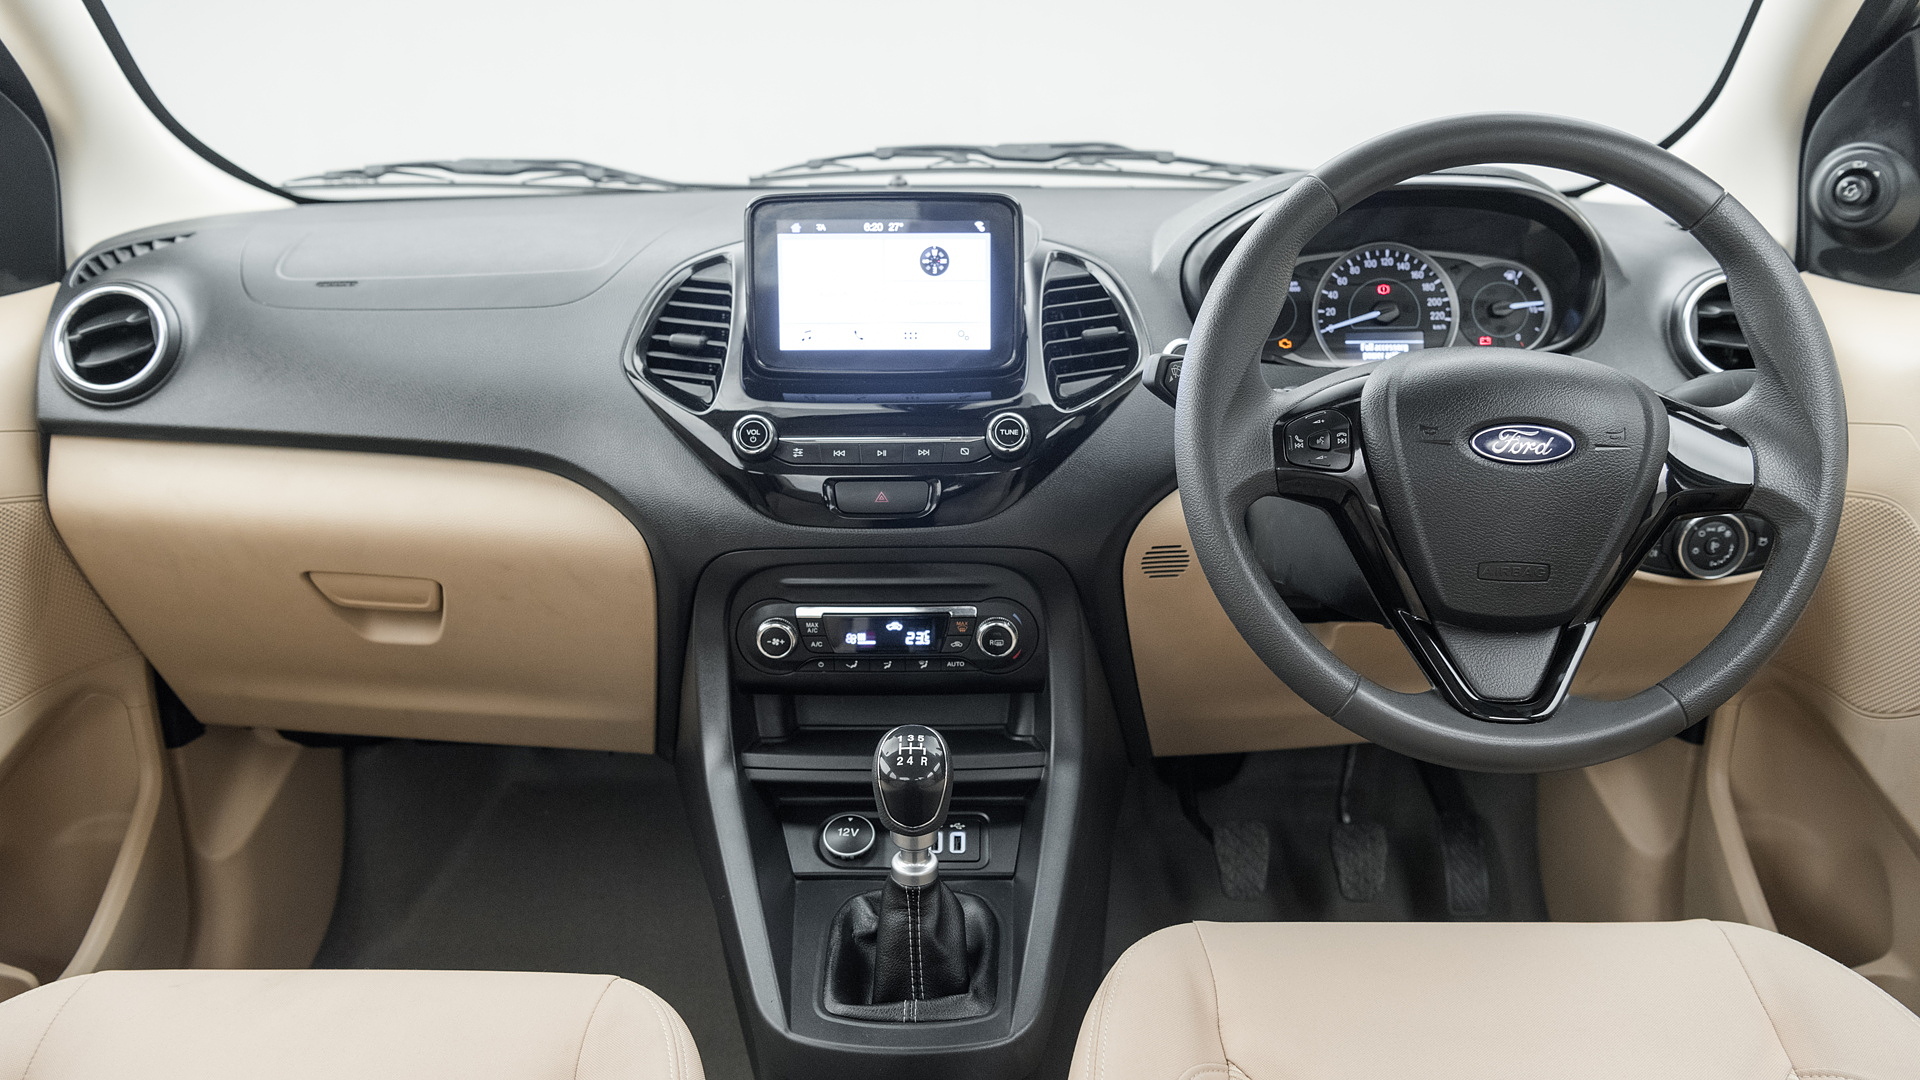 Ford Aspire Images Interior Exterior Photo Gallery Carwale